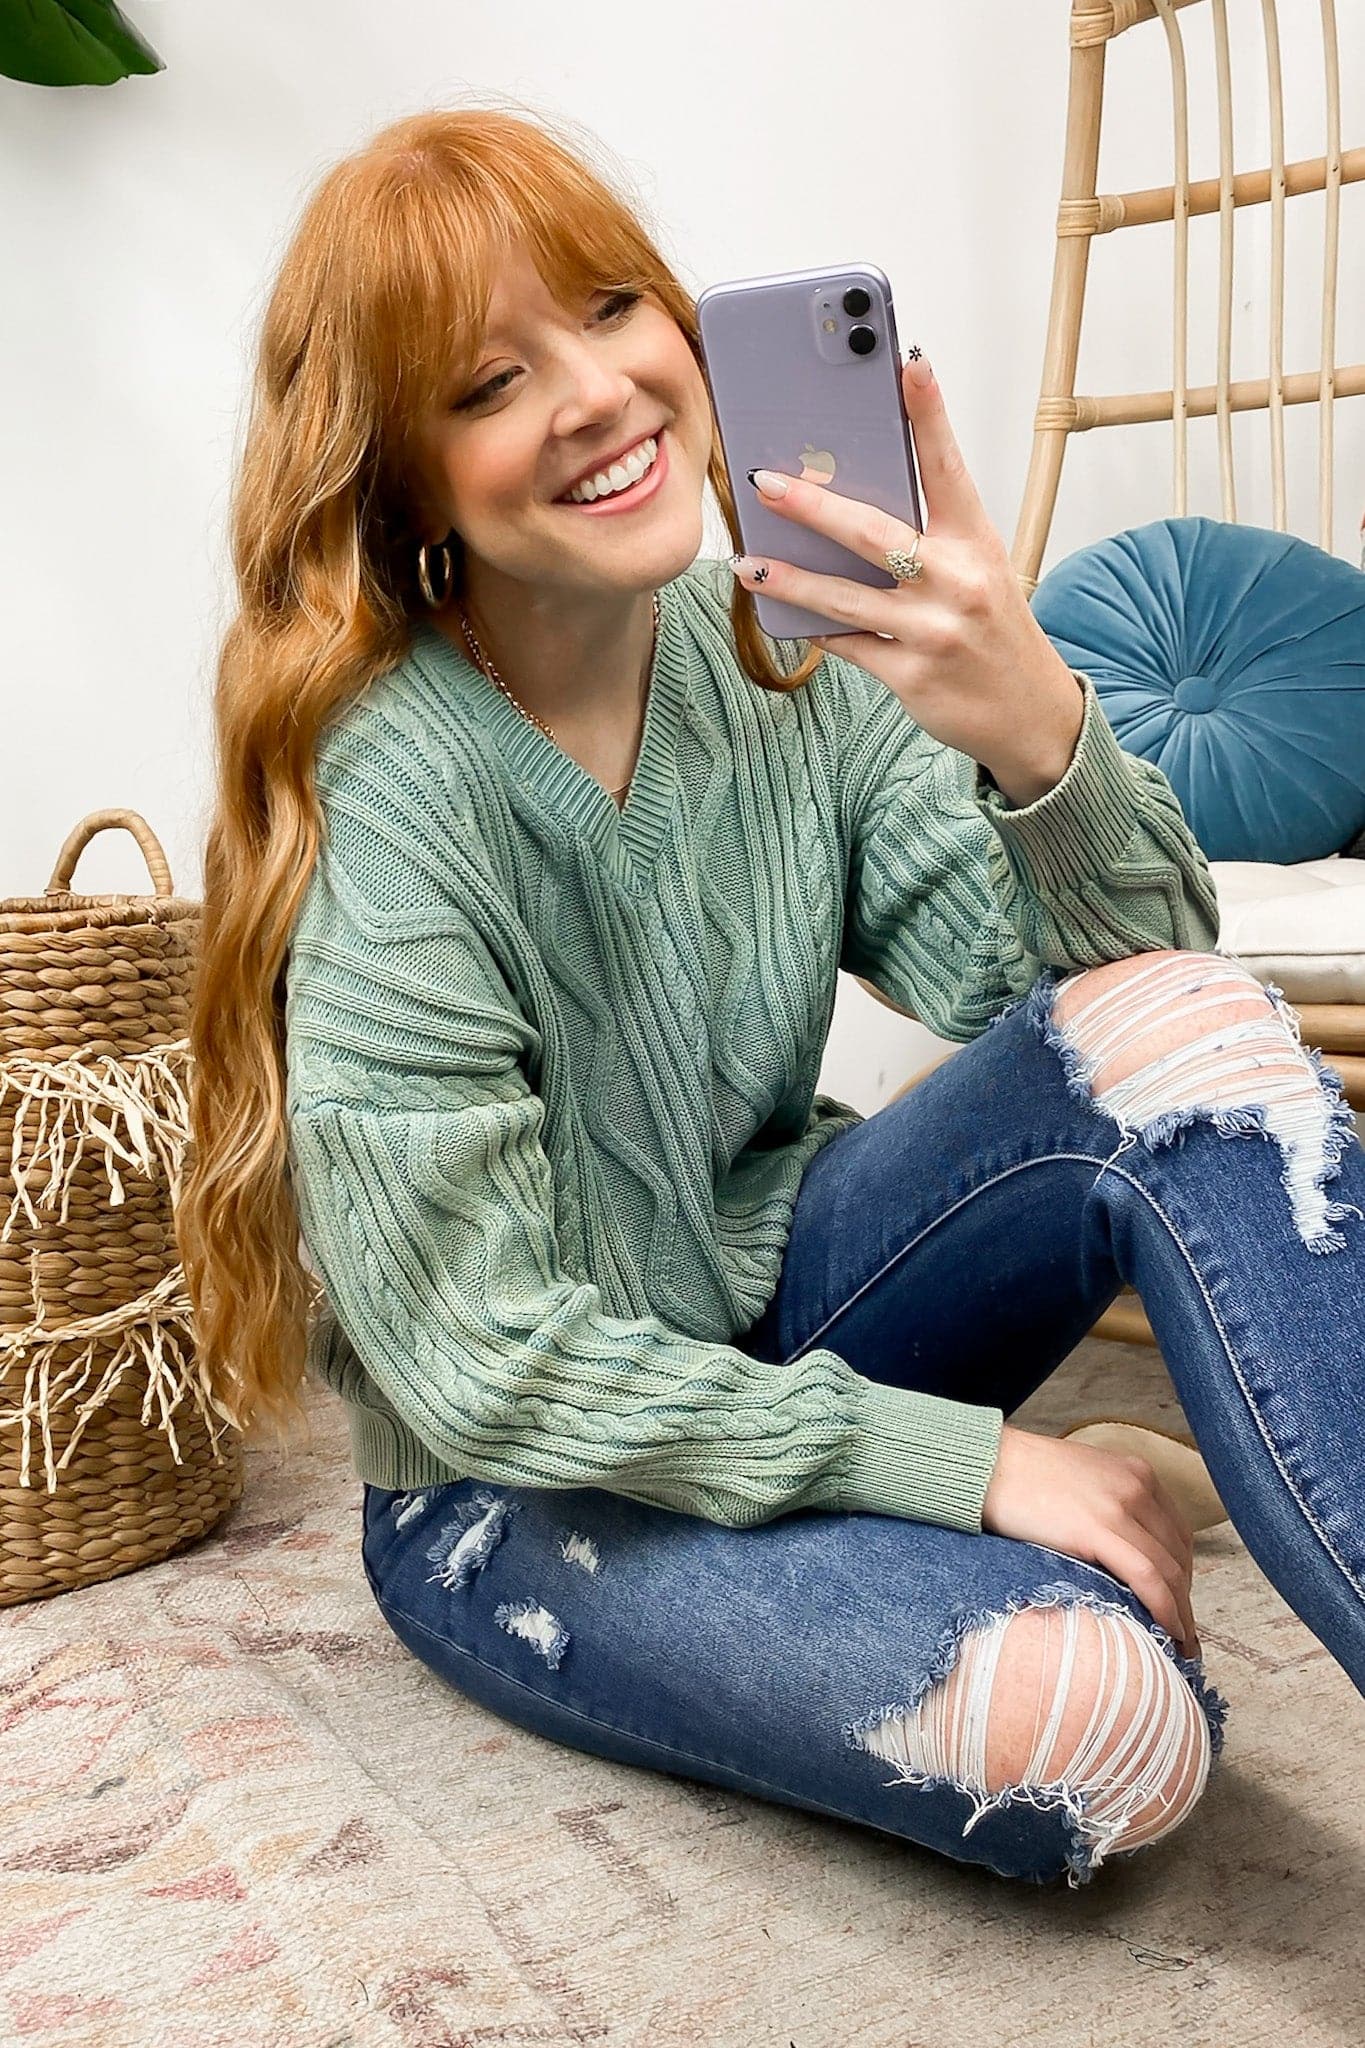  See the City Cable Knit Sweater - FINAL SALE - Madison and Mallory